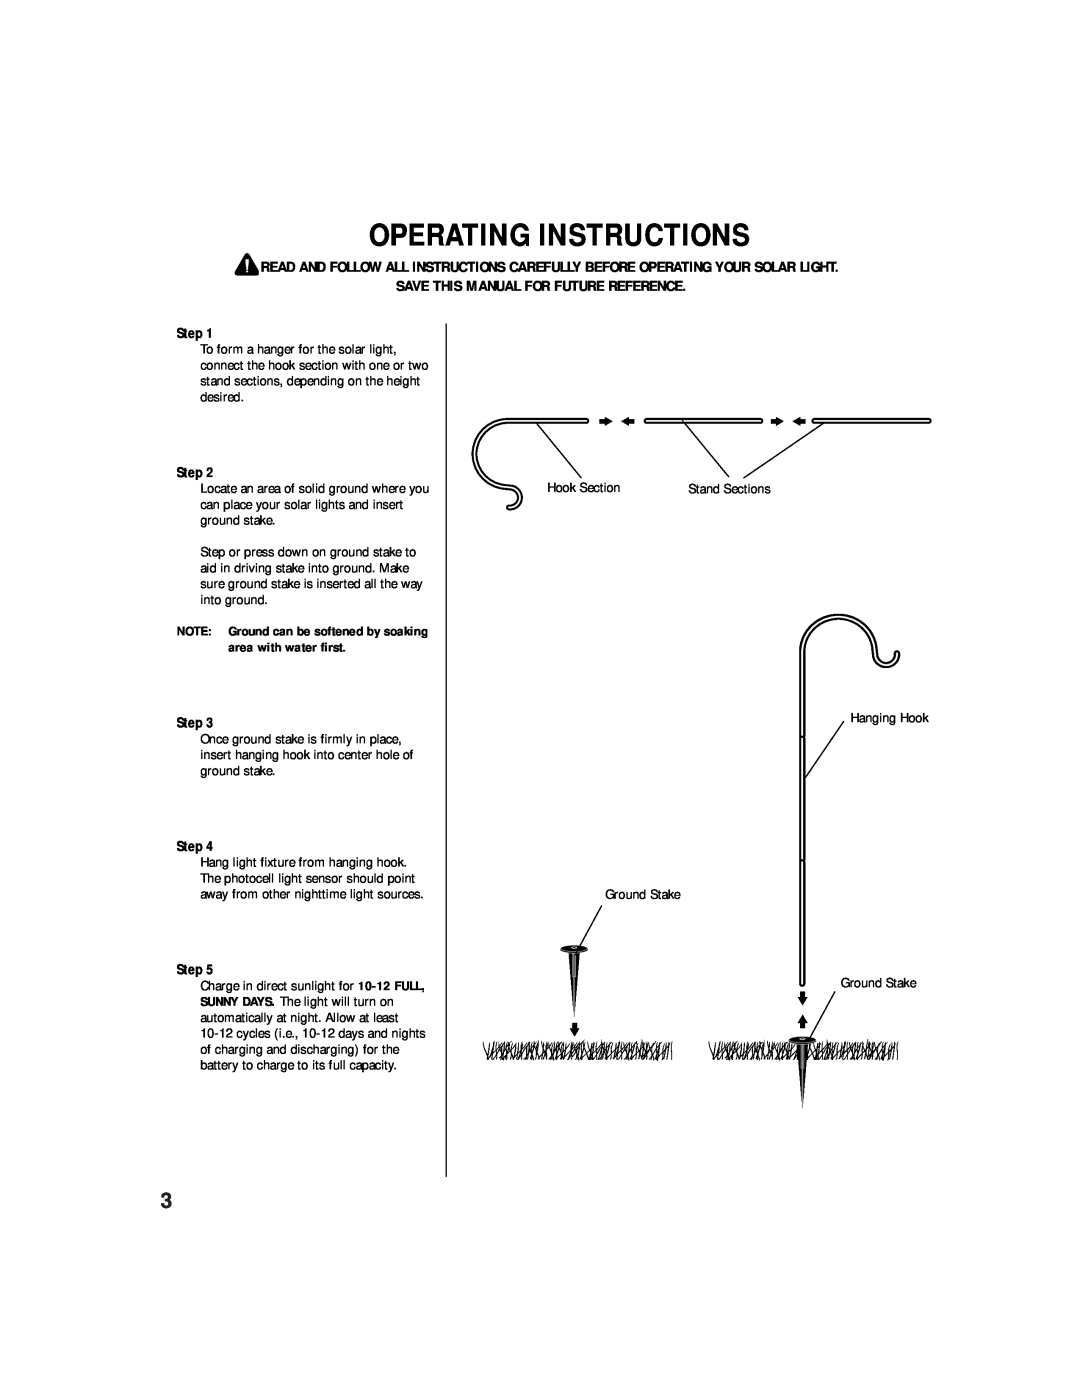 Brinkmann ENDURA owner manual Operating Instructions, SAVE THIS MANUAL FOR FUTURE REFERENCE Step 